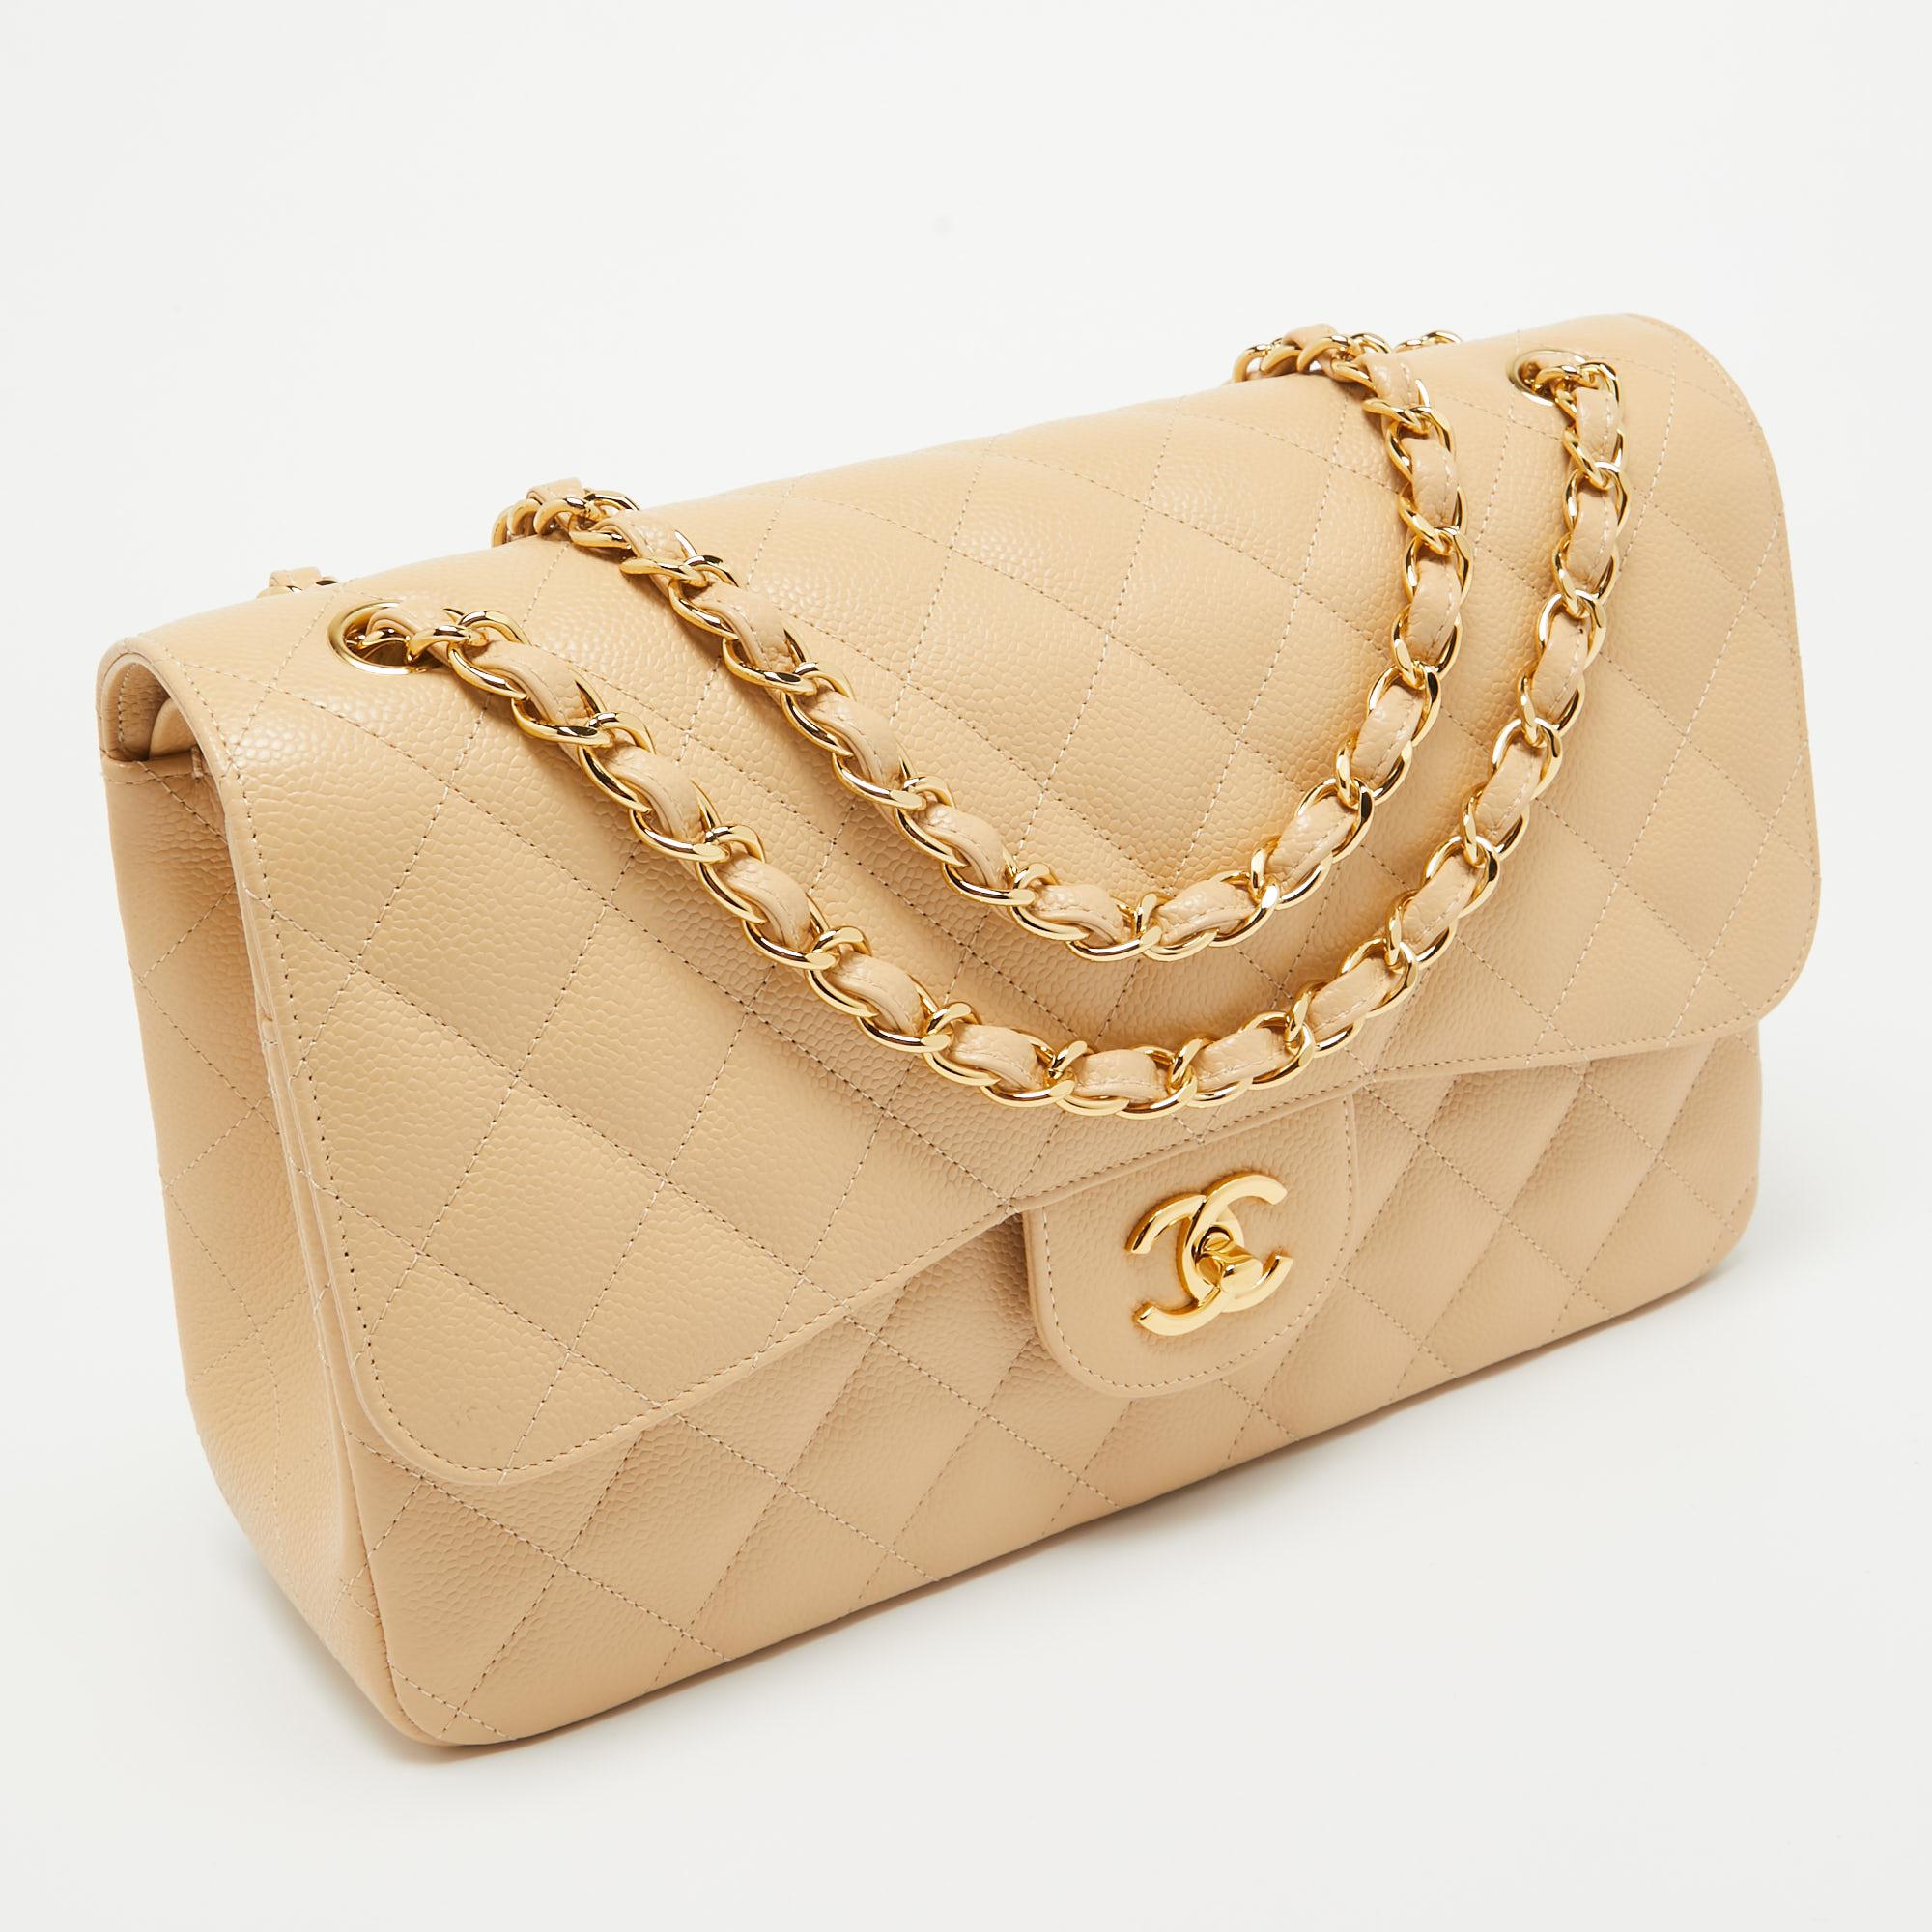 Chanel Beige Quilted Caviar Leather Jumbo Classic Double Flap Bag In Excellent Condition For Sale In Dubai, Al Qouz 2